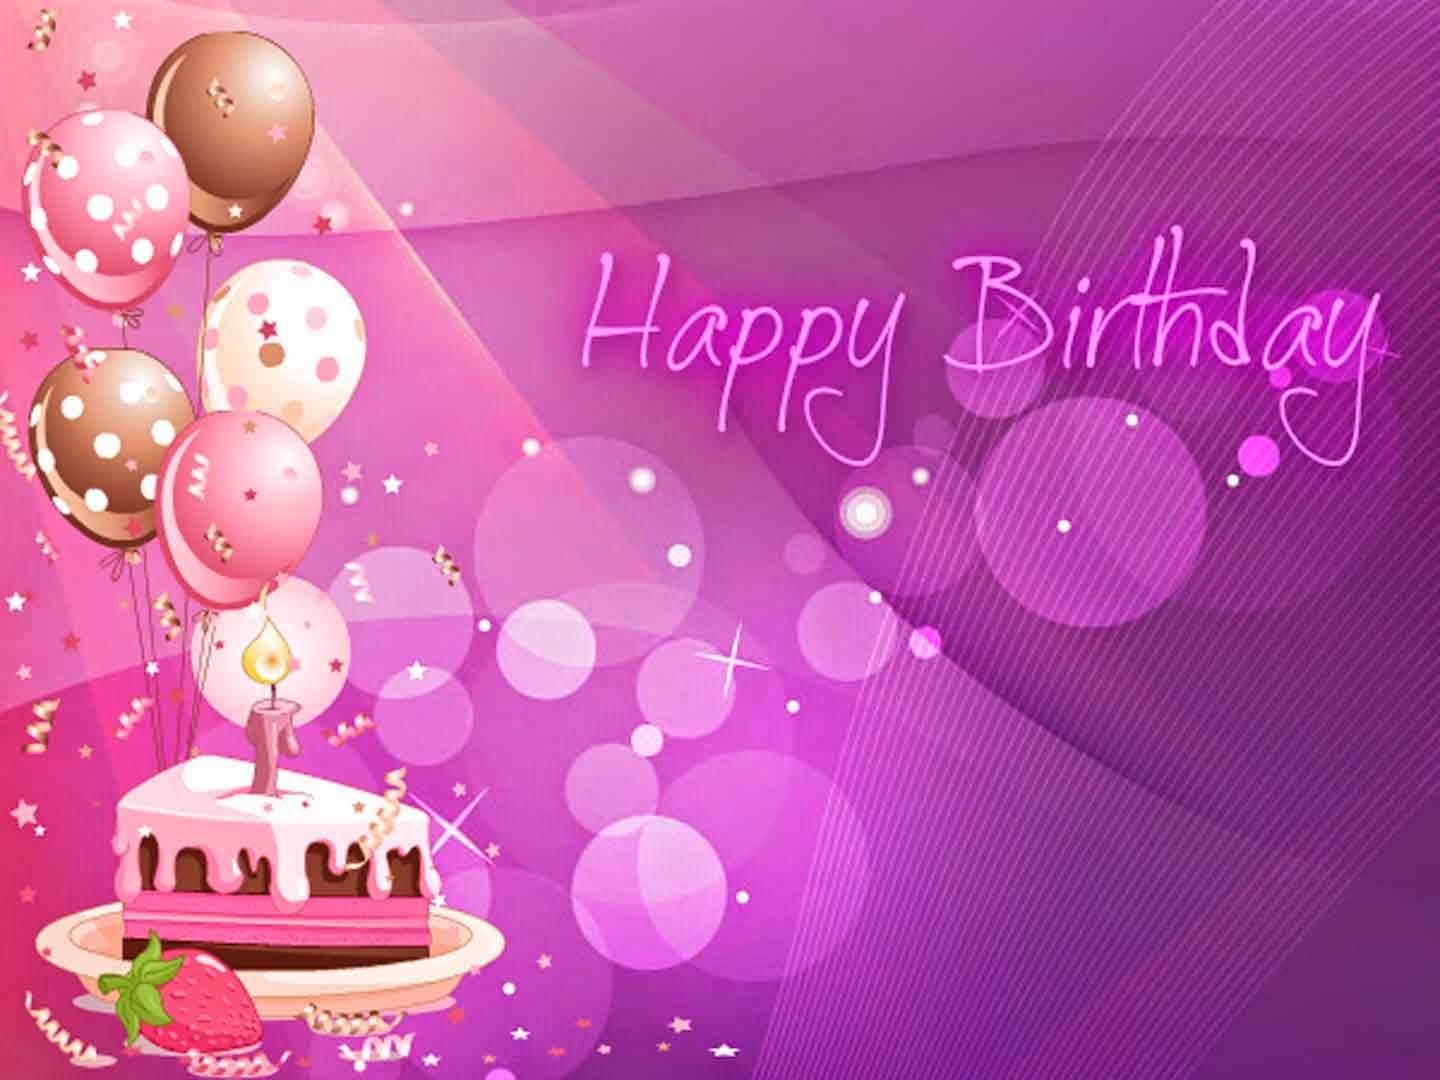 Happy Birthday Wallpapers Download High Definition 1440x1080